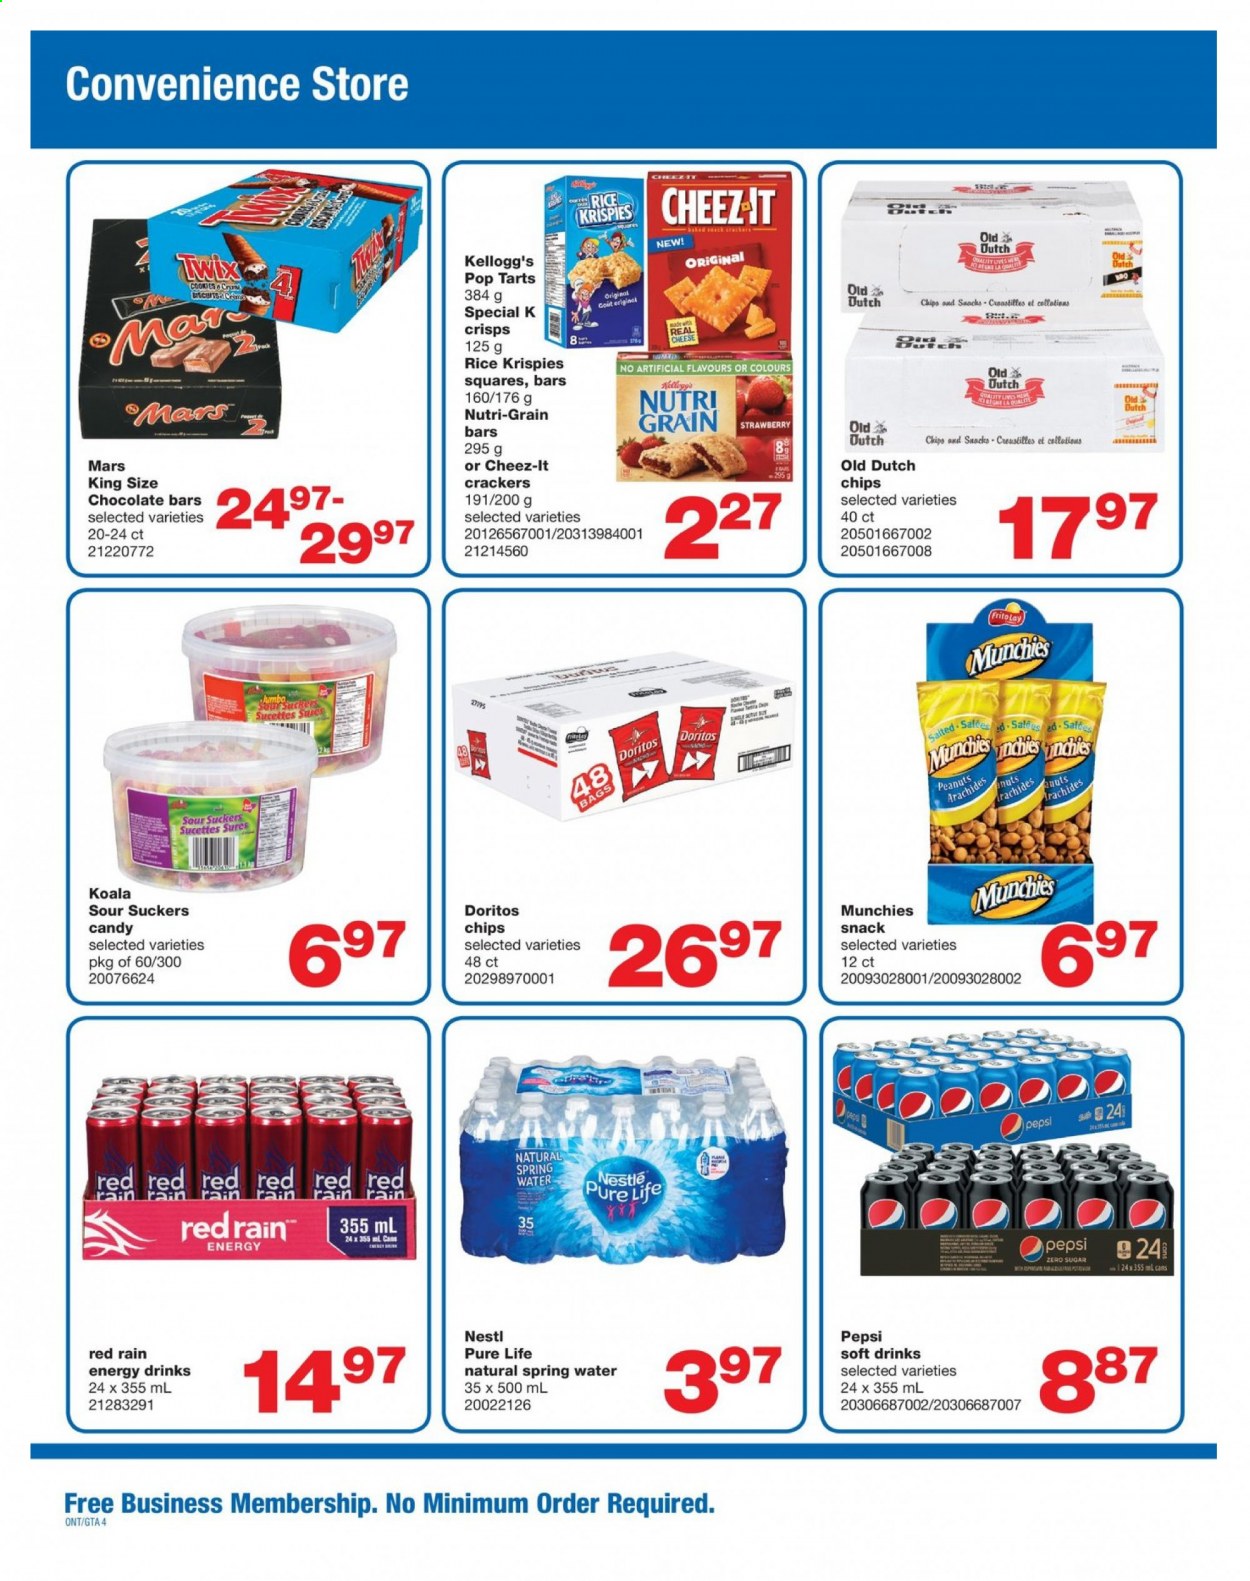 thumbnail - Wholesale Club Flyer - April 08, 2021 - April 28, 2021 - Sales products - Ace, cheese, cookies, snack, Twix, Mars, crackers, Kellogg's, Pop-Tarts, chocolate bar, Doritos, Cheez-It, Rice Krispies, Nutri-Grain, peanuts, Pepsi, energy drink, soft drink, spring water, Nestlé, chips. Page 4.